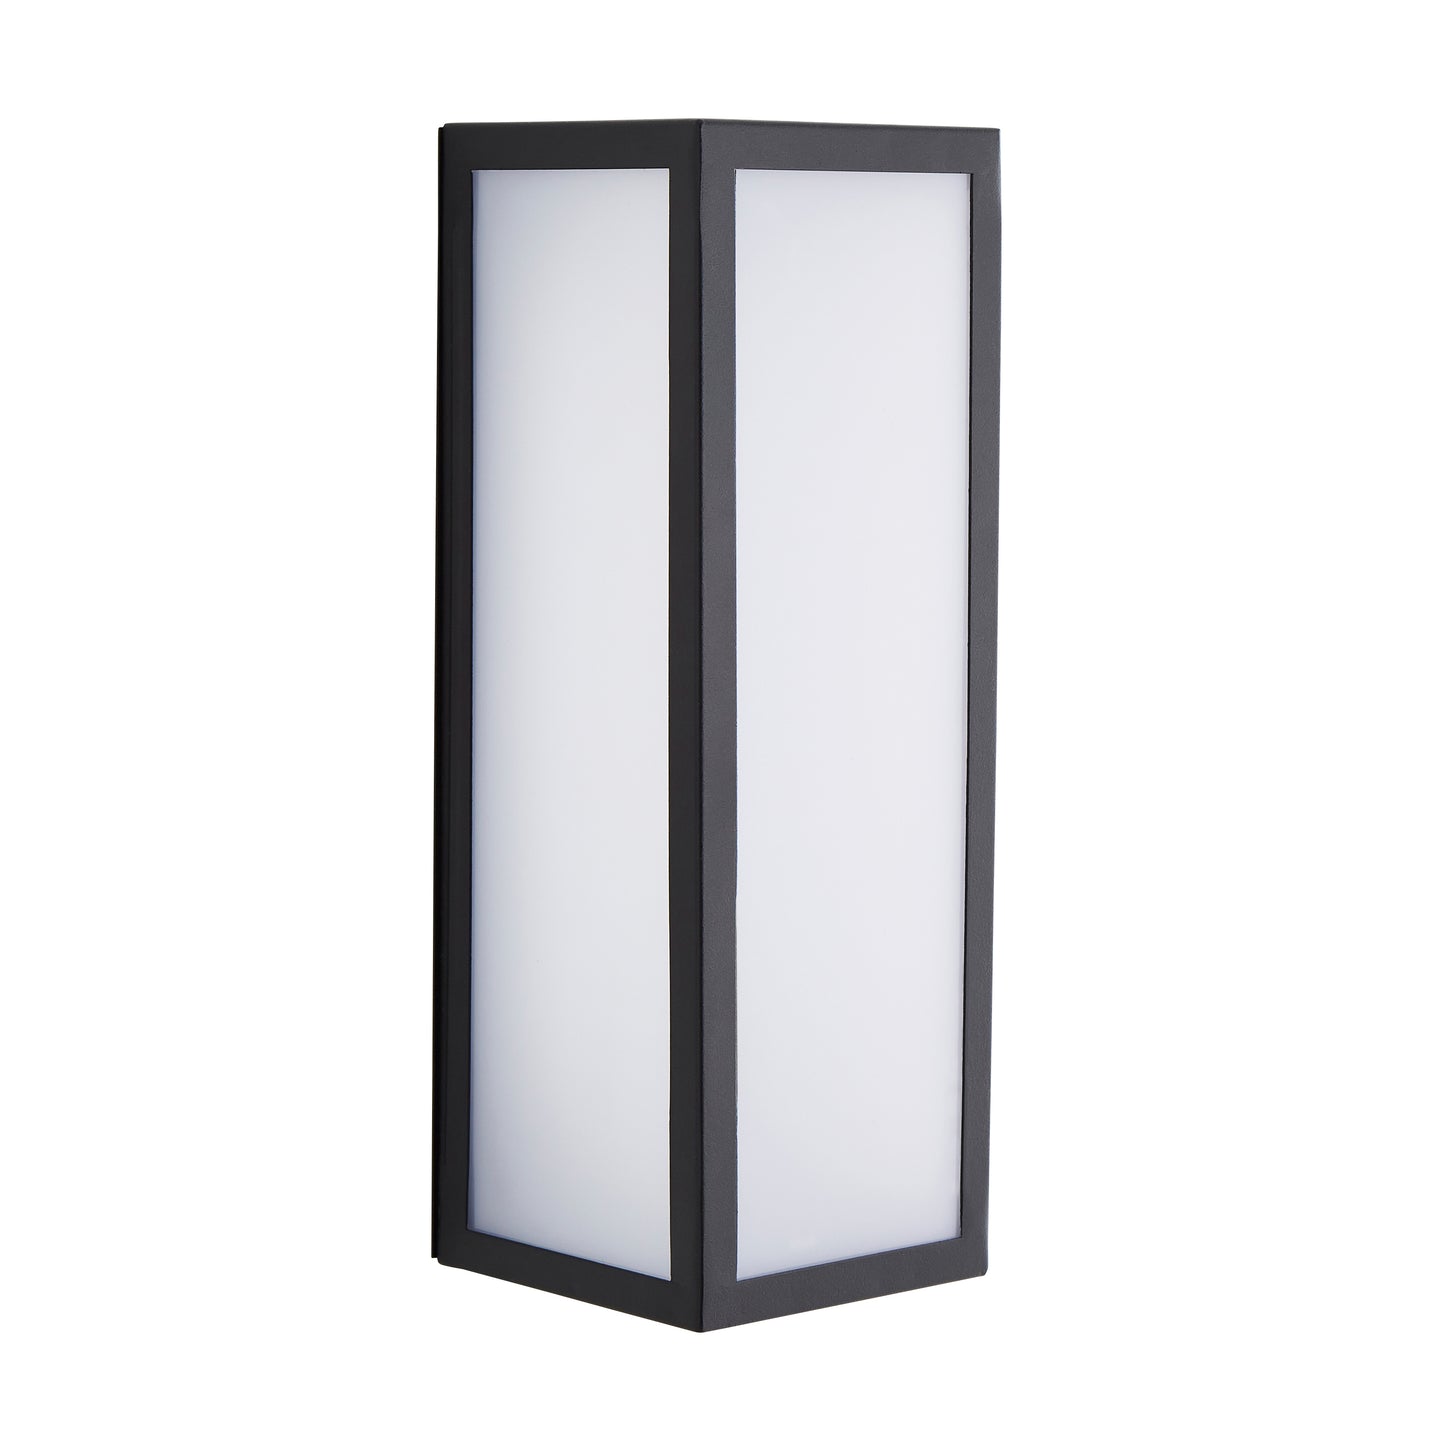 A modern take on a traditional design outdoor wall light perfect for adding style and security The traditional front-door lantern has had a modern make over in the form of our Harri  outdoor wall light with its square black stainless steel construction and completed with opal polycarbonate windows this light this is sure to add an statement to any wall. 